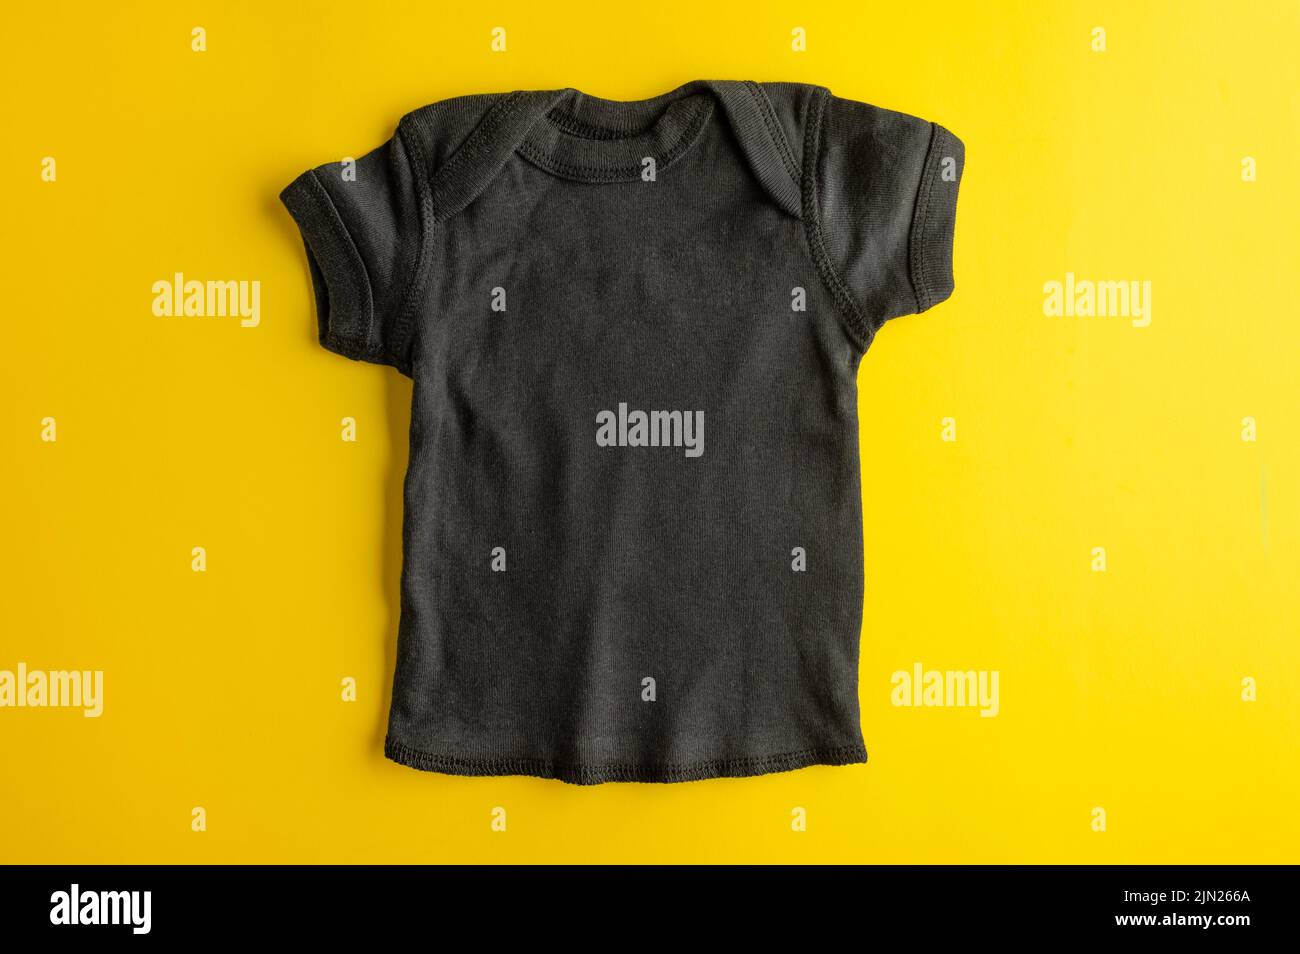 Flat lay mockup of a black t-shirt for a boy on a bright yellow background. Basic clothes for children made of natural fabric. Layout for design and p Stock Photo